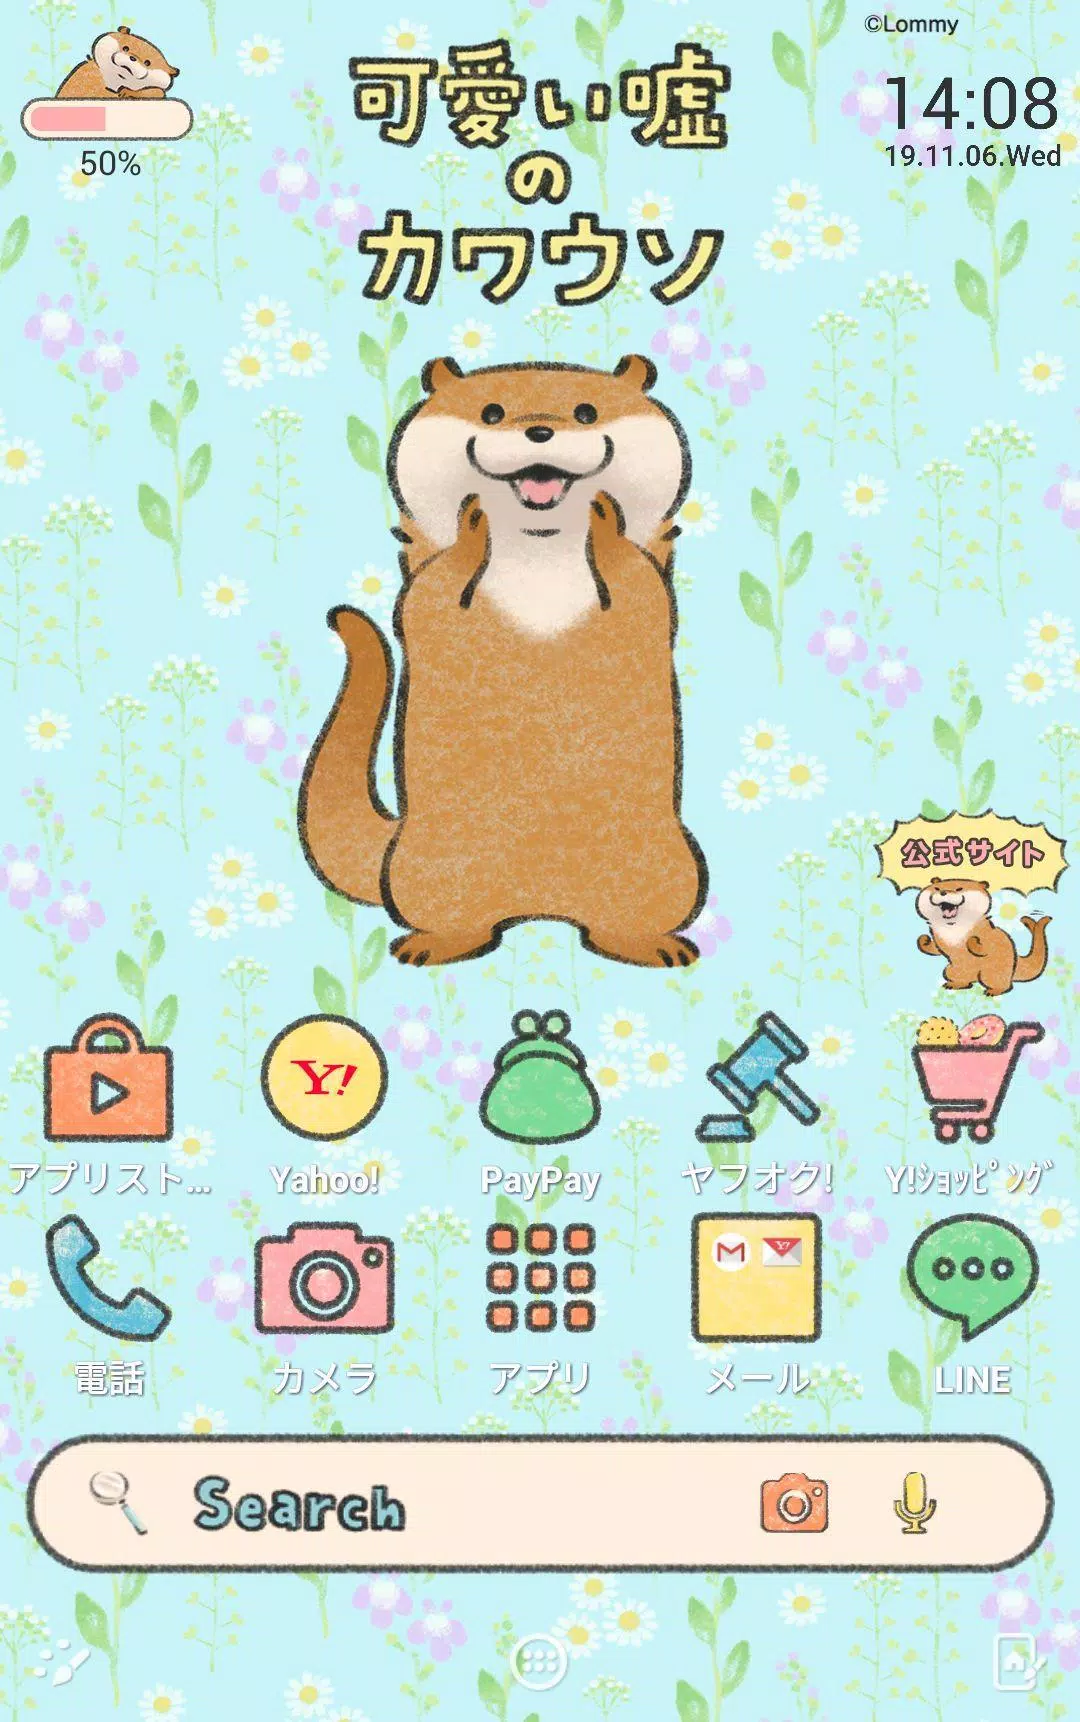 Lommy 可愛い嘘のカワウソ 壁紙きせかえ Apk For Android Download